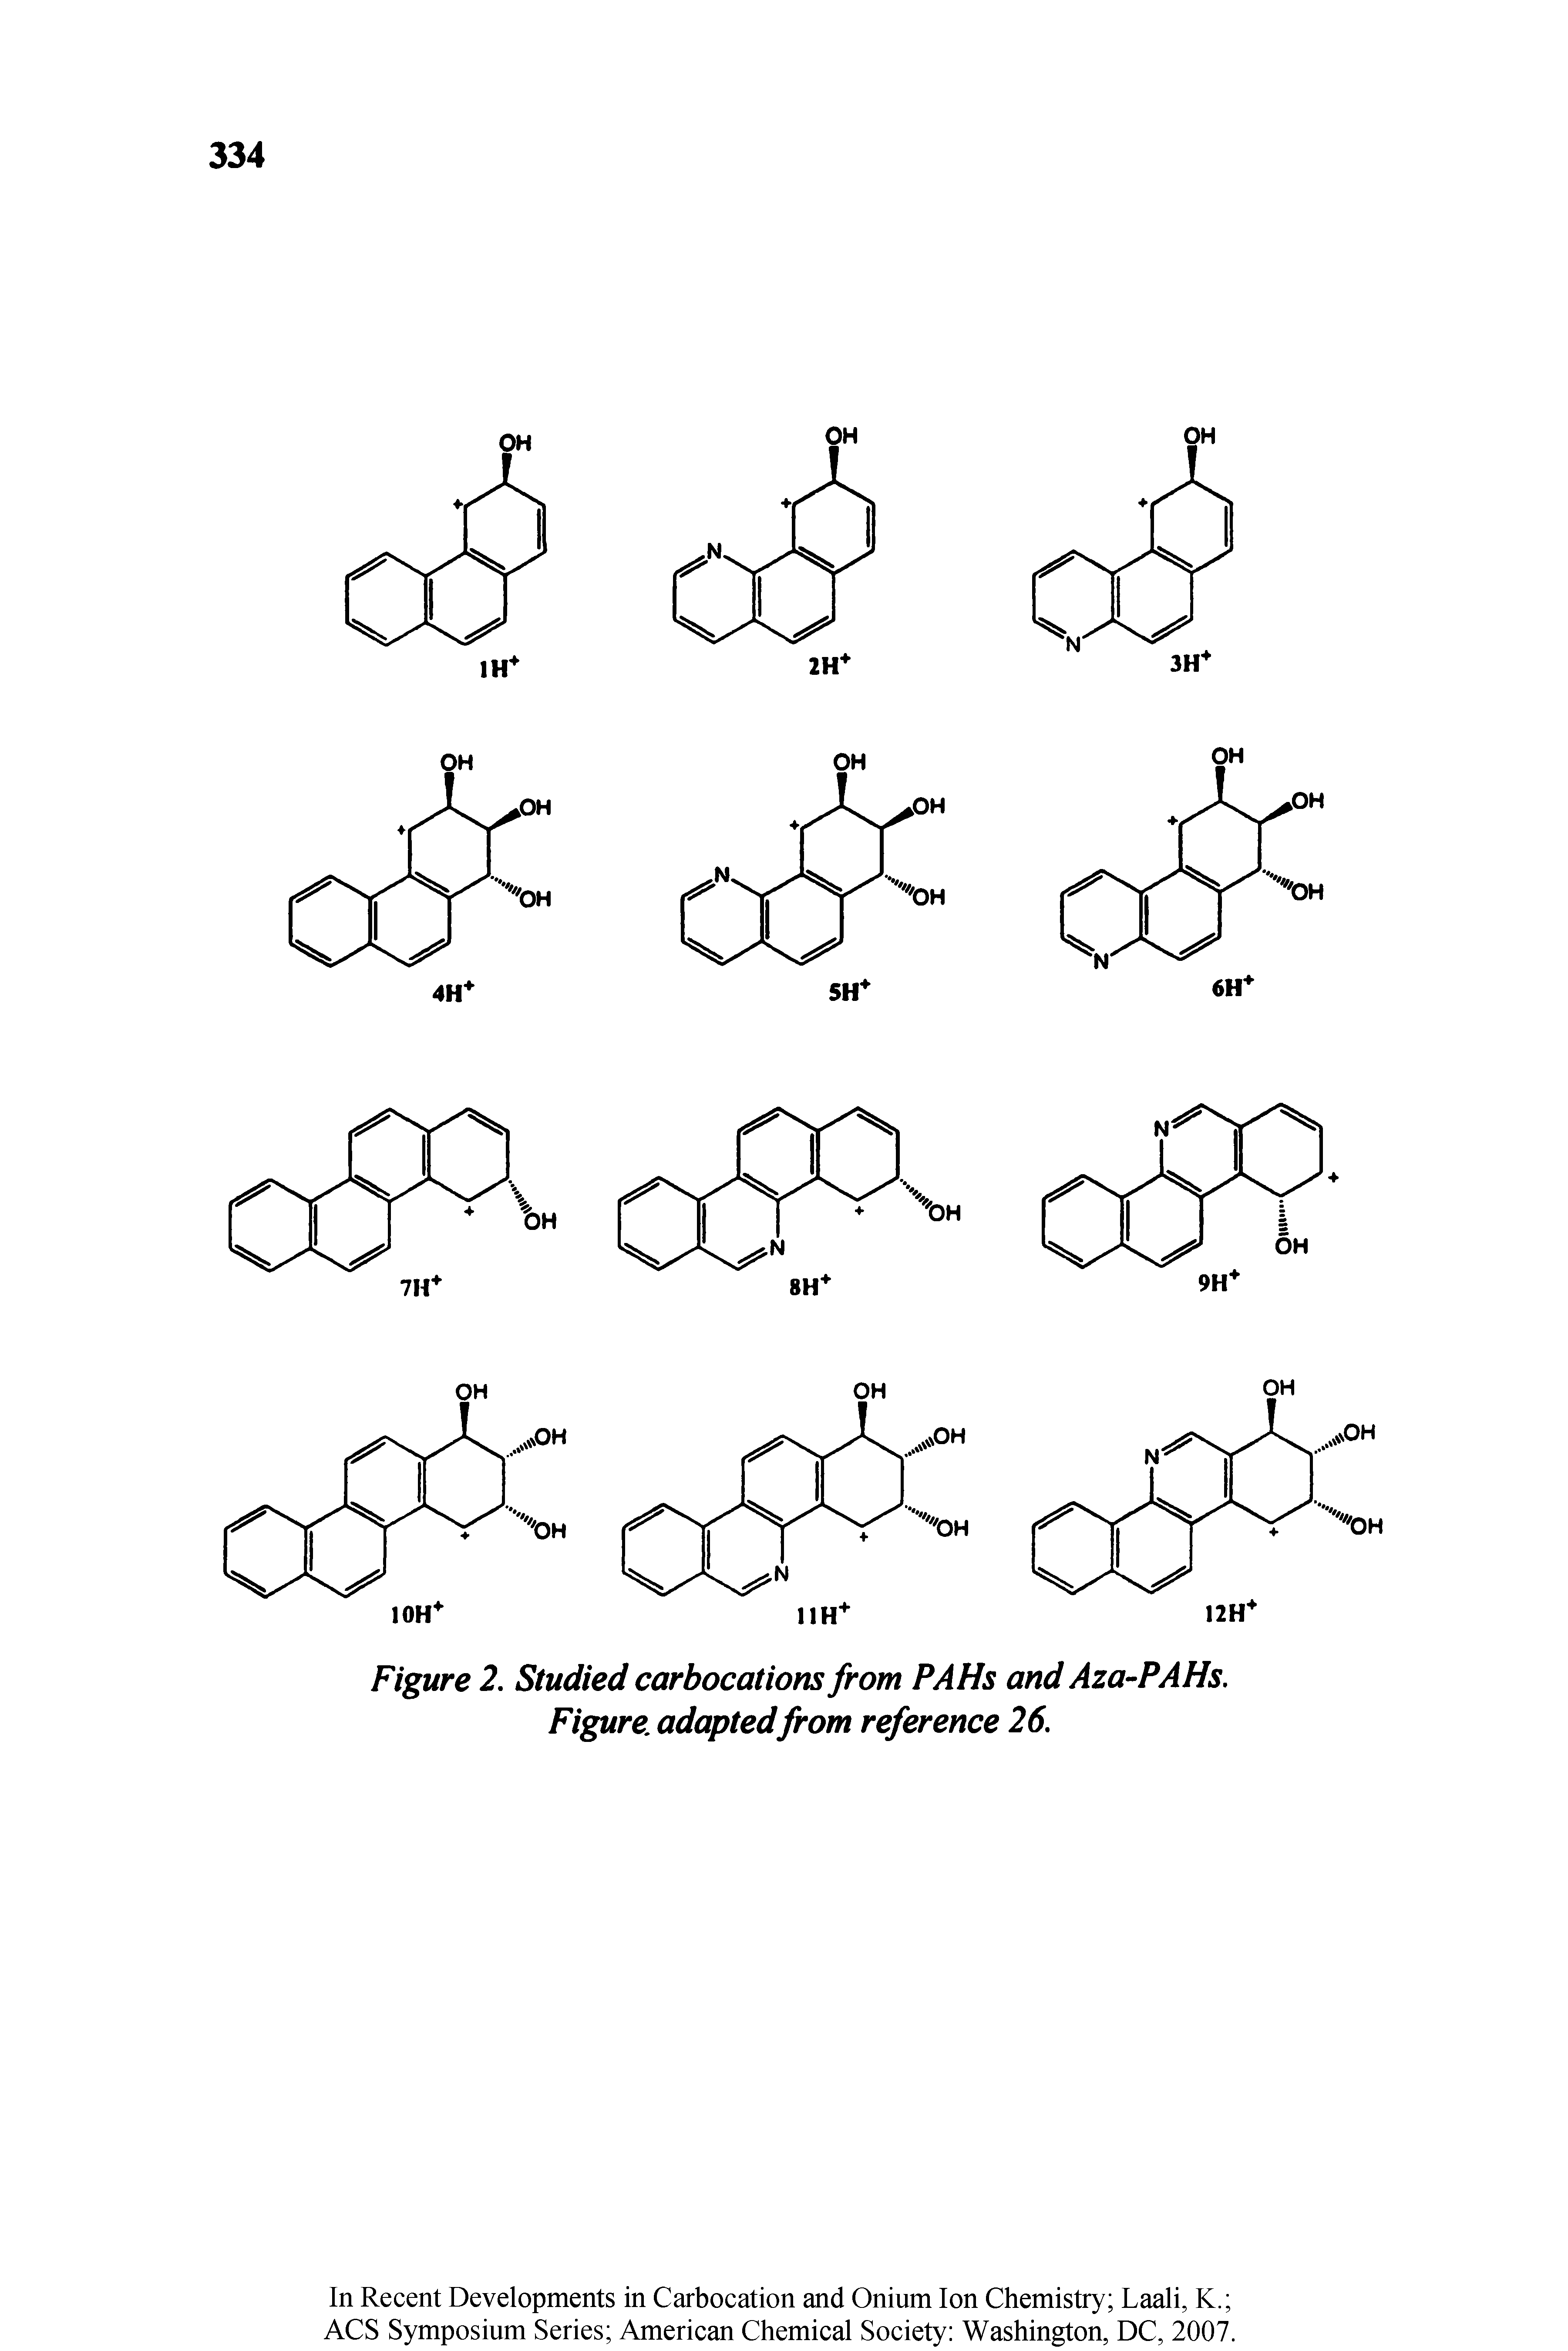 Figure 2. Studied carbocations from PAHs and Aza-PAHs. Figure adapted from reference 26.